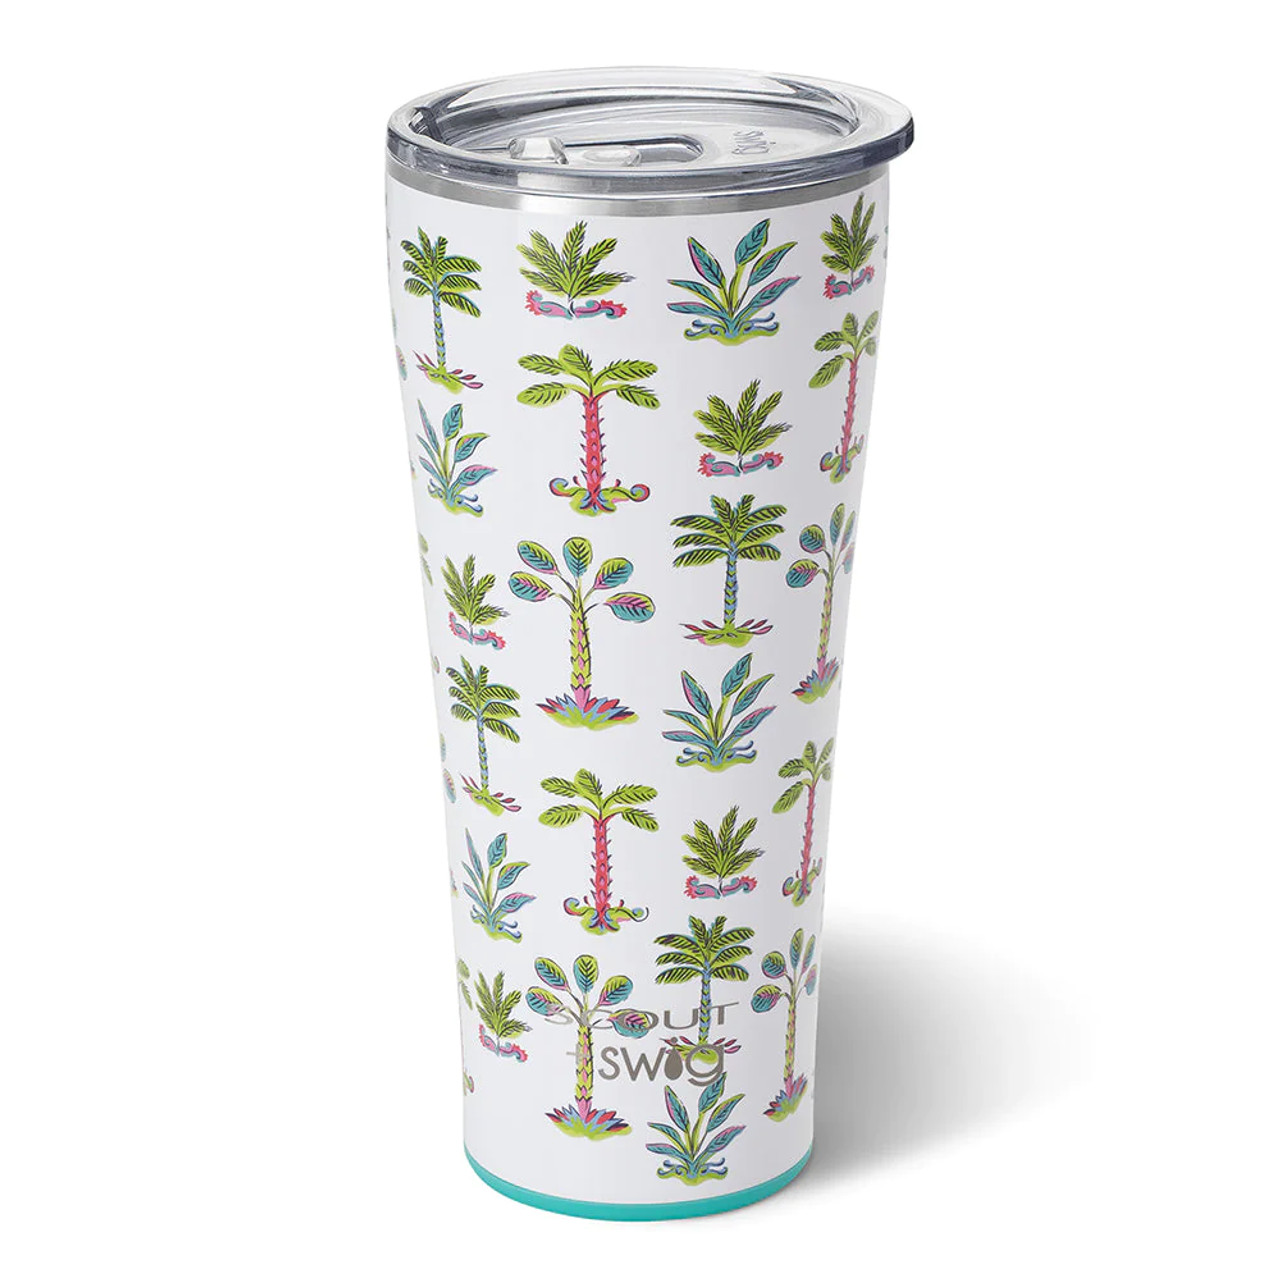 https://cdn11.bigcommerce.com/s-bqmxwbh8/images/stencil/1280x1280/products/2483/7373/swig-life-signature-32oz-insulated-stainless-steel-tumbler-scout-hot-tropic-main__08129.1680277310.jpg?c=2